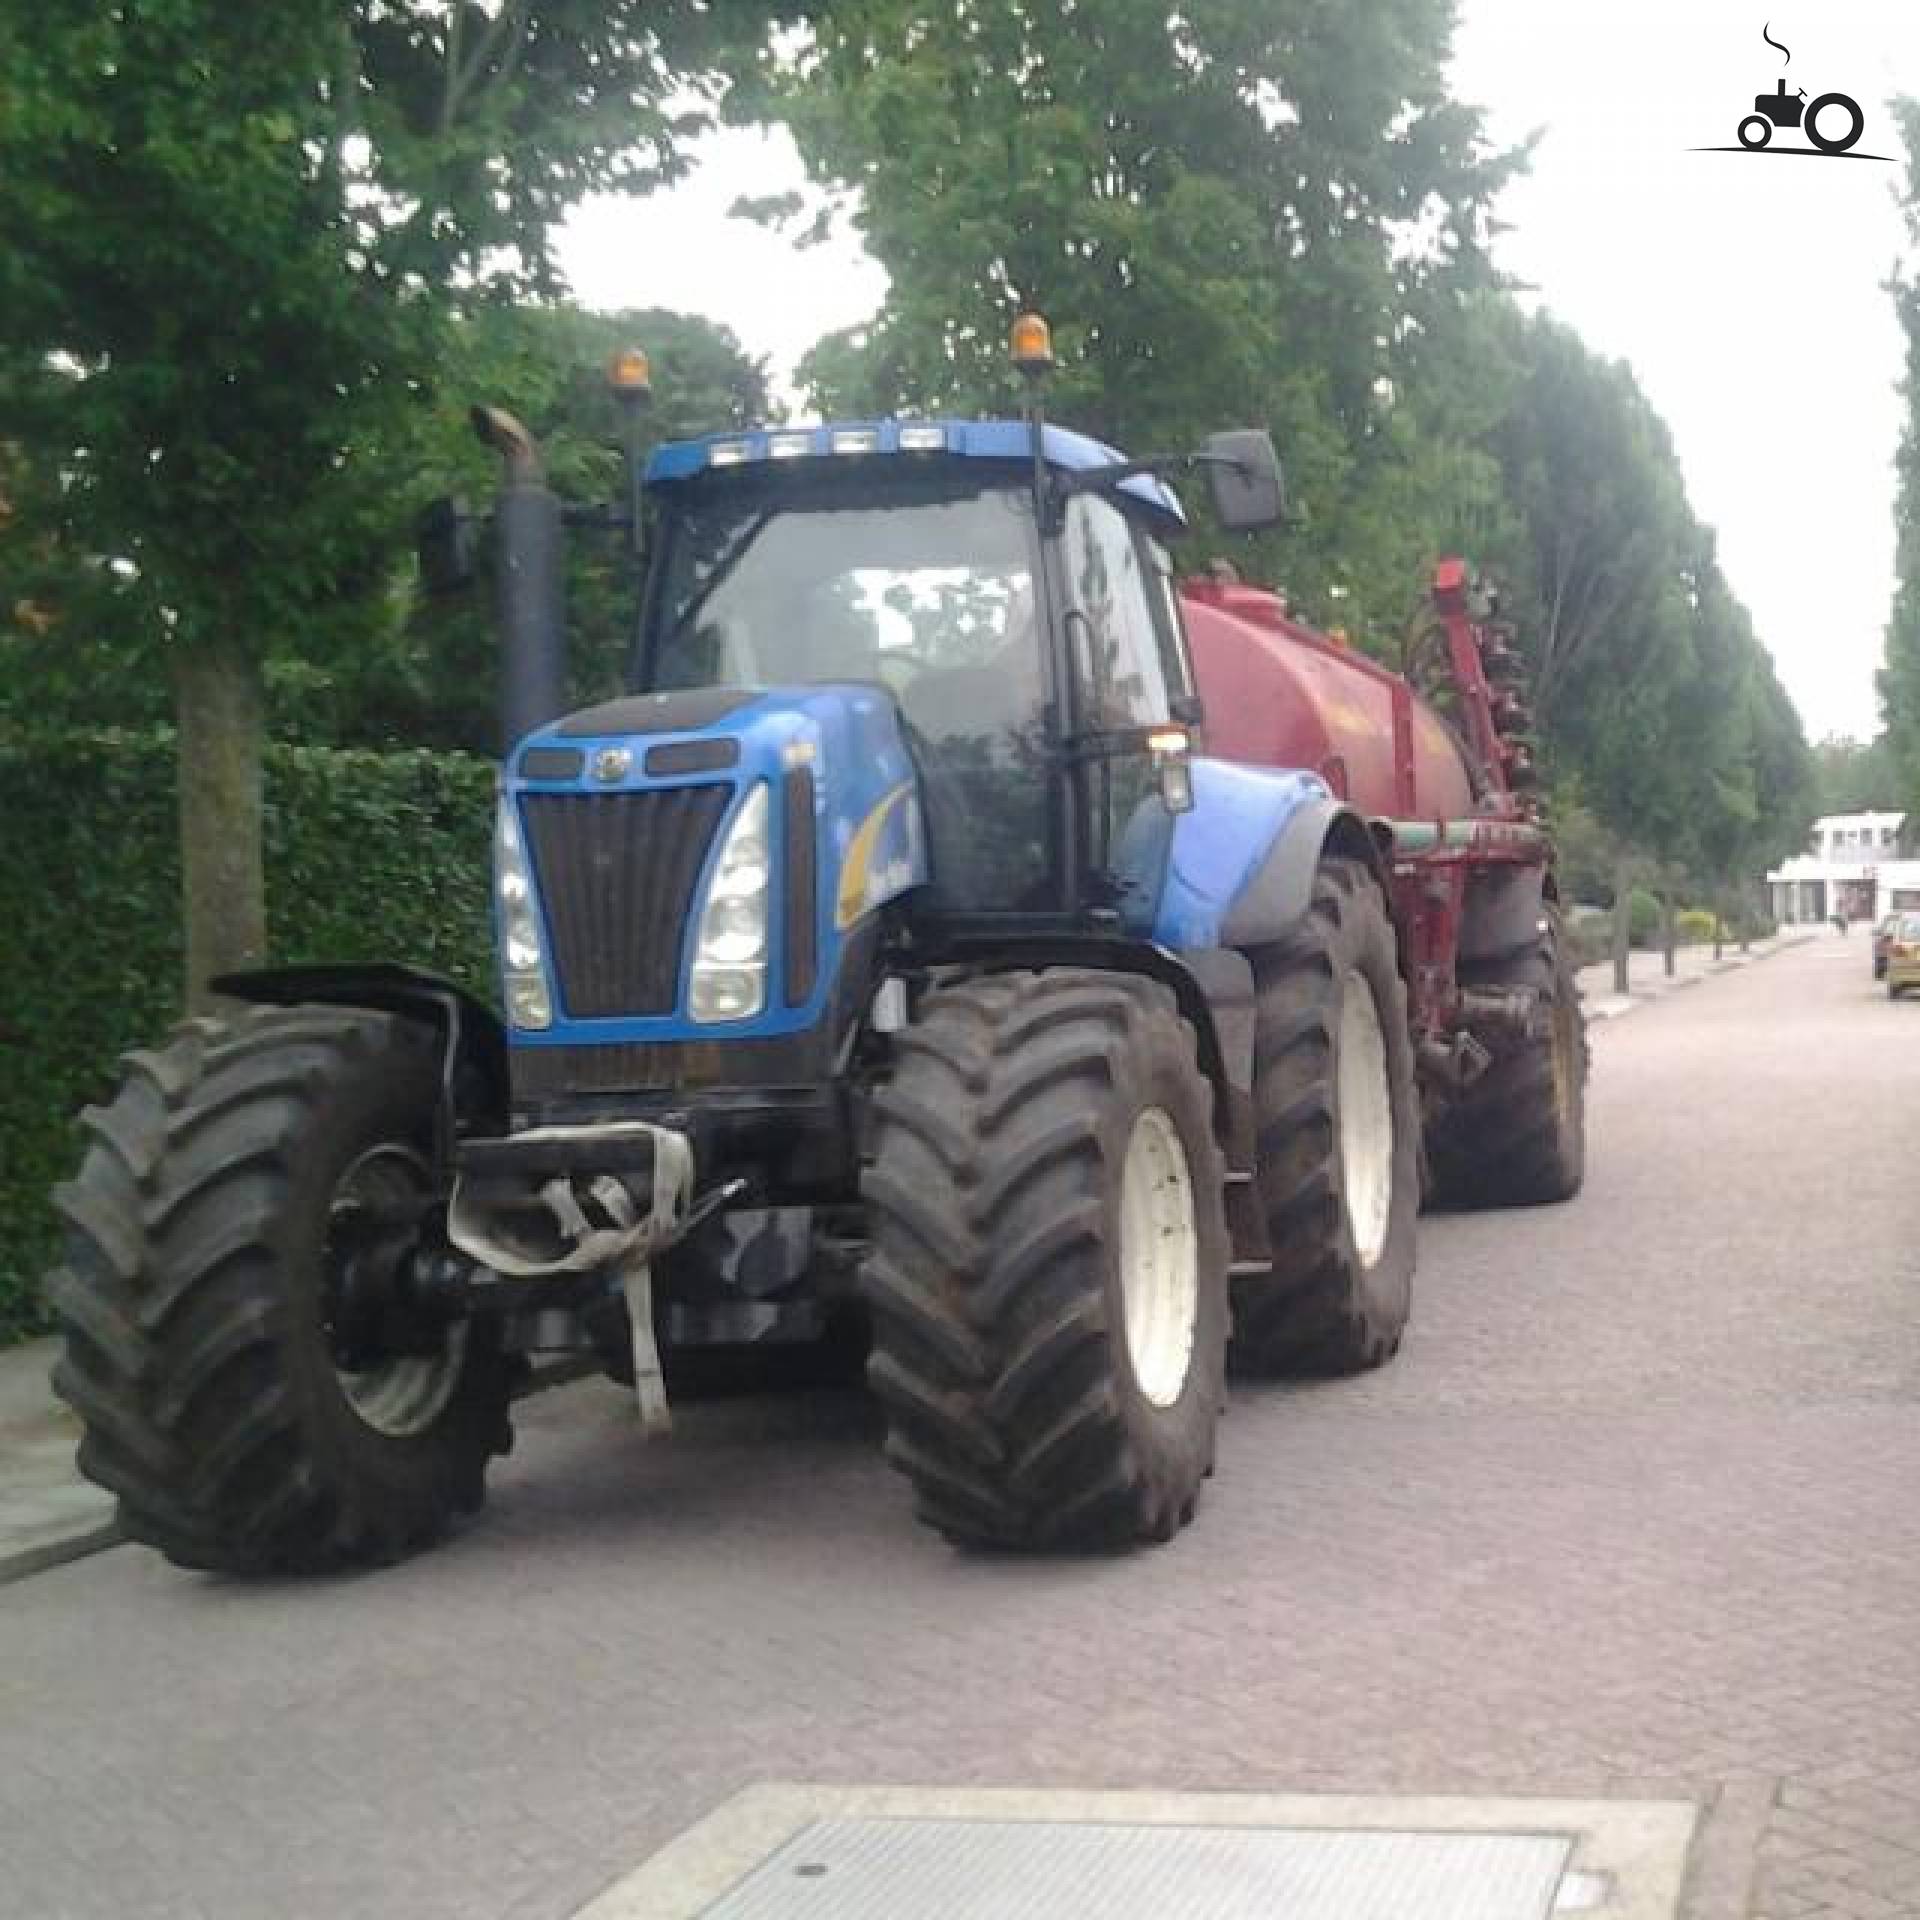 New Holland T 8040